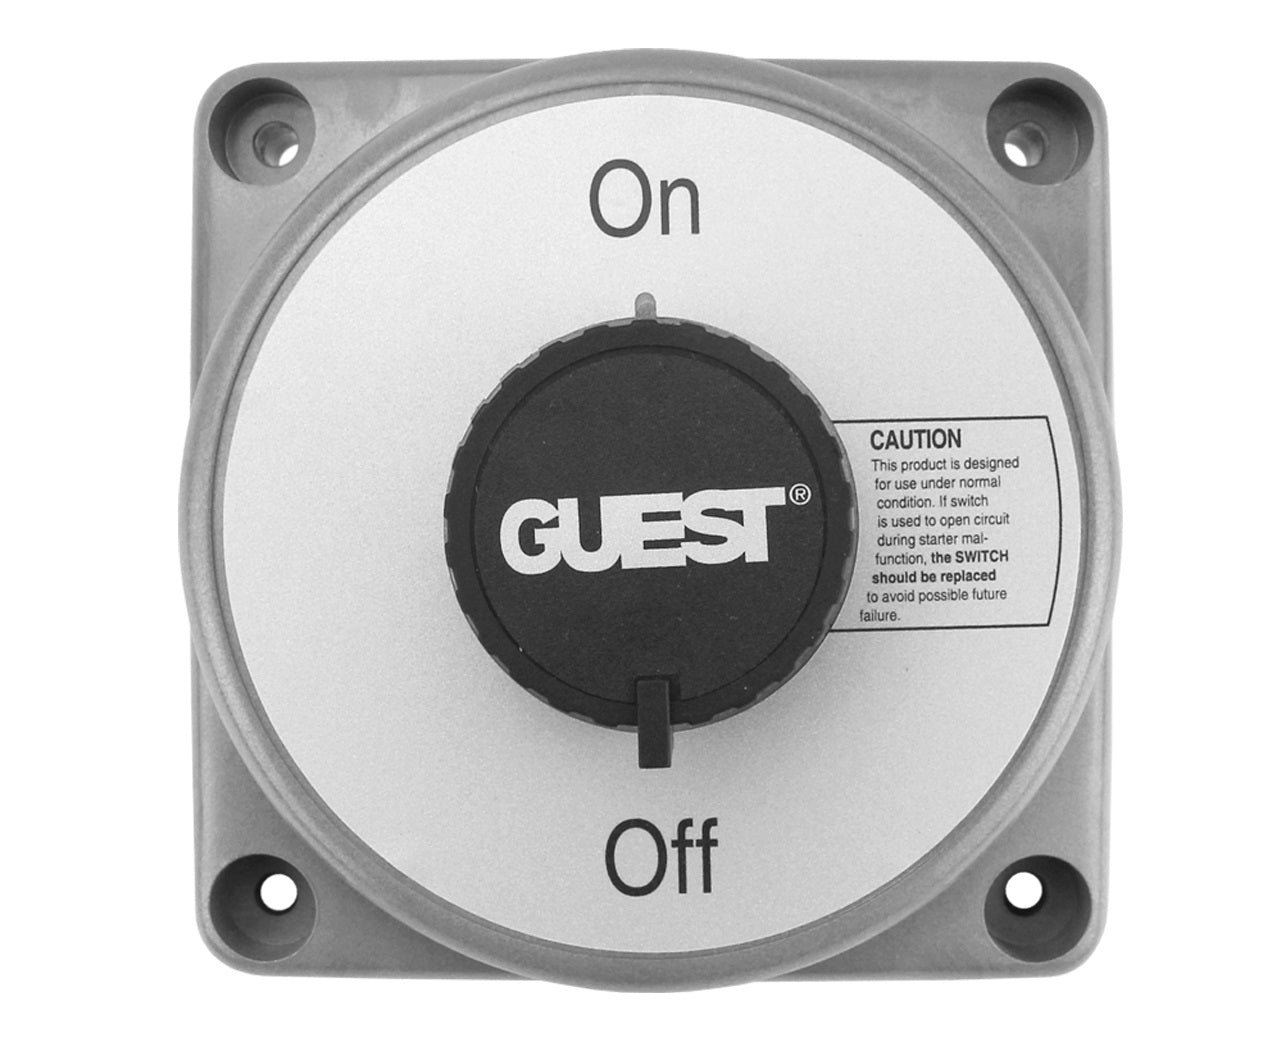 Guest 2303A Battery Switch Heavy Duty On/Off Switch